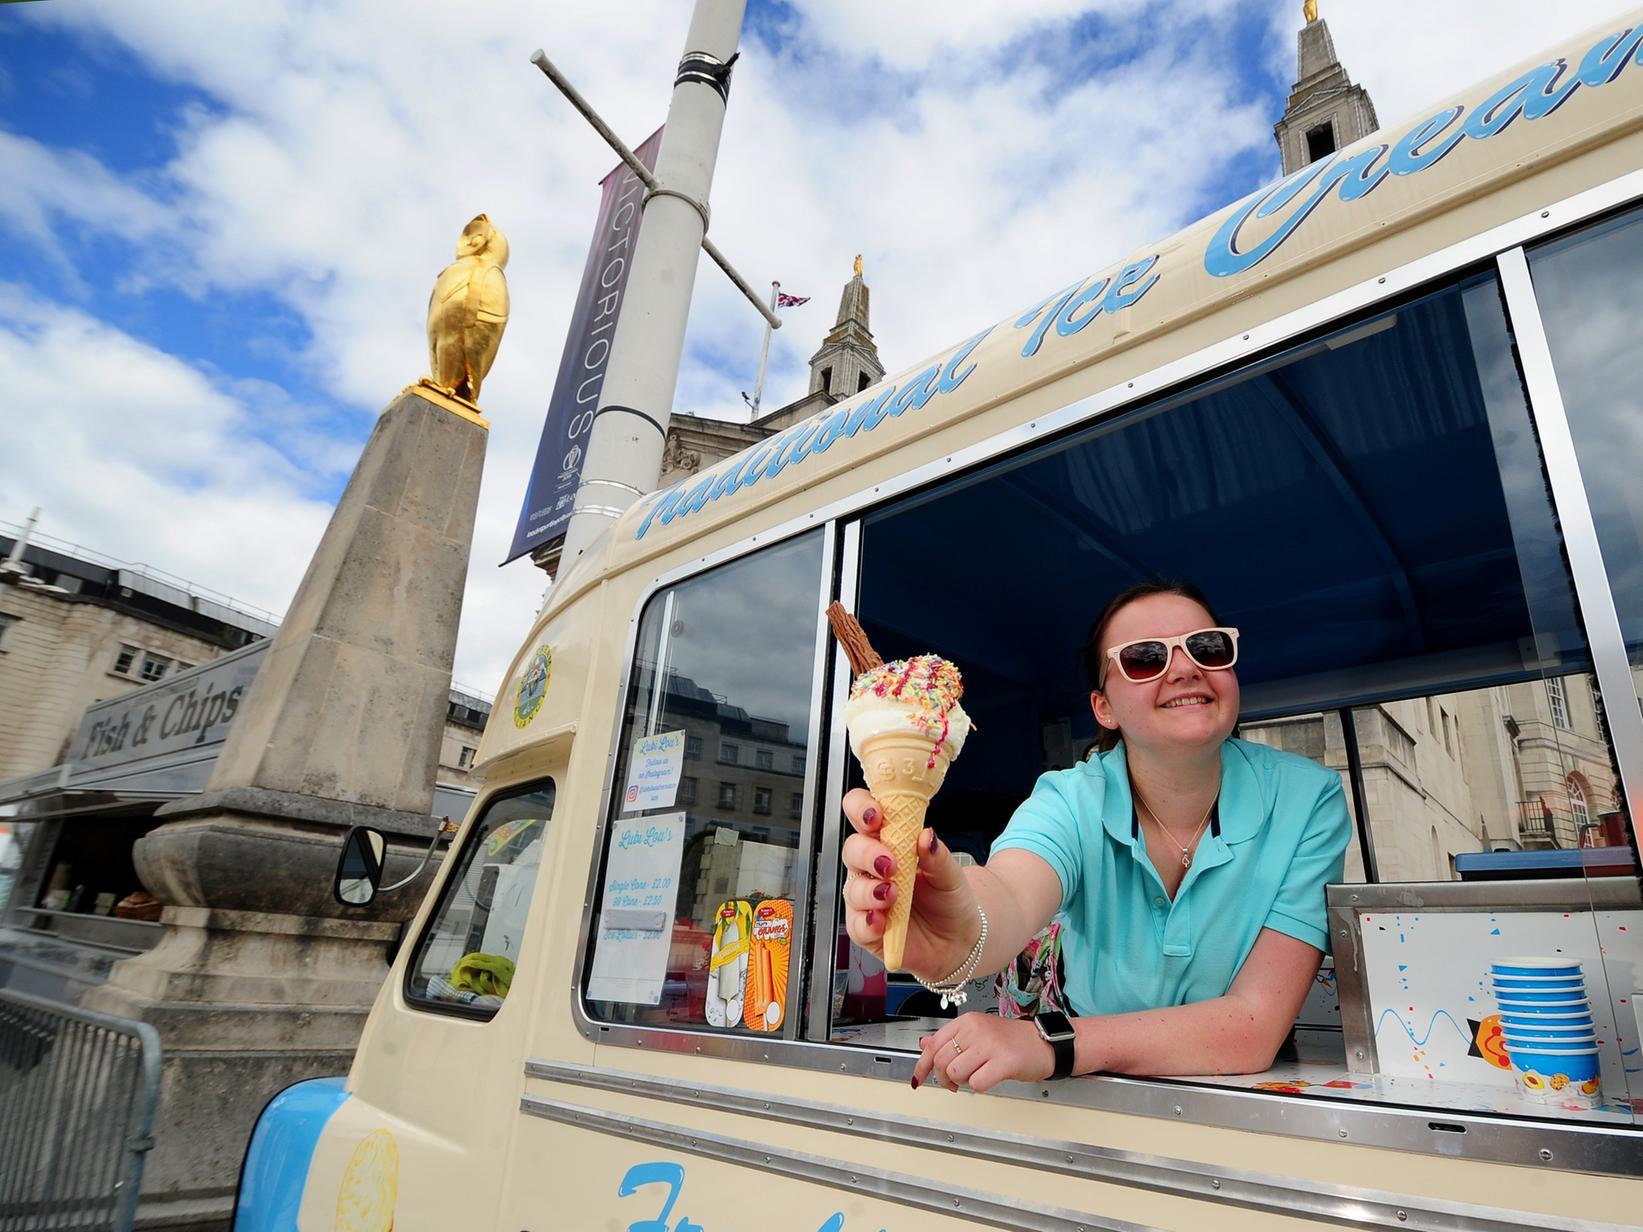 Thousands of foodies headed to Millennium Square for the three-day Leeds Food and Drink Festival. Glorious sunshine added to the occasion with revellers enjoying food ranging from Thai, Indian and Lebanese, to sweet treats.